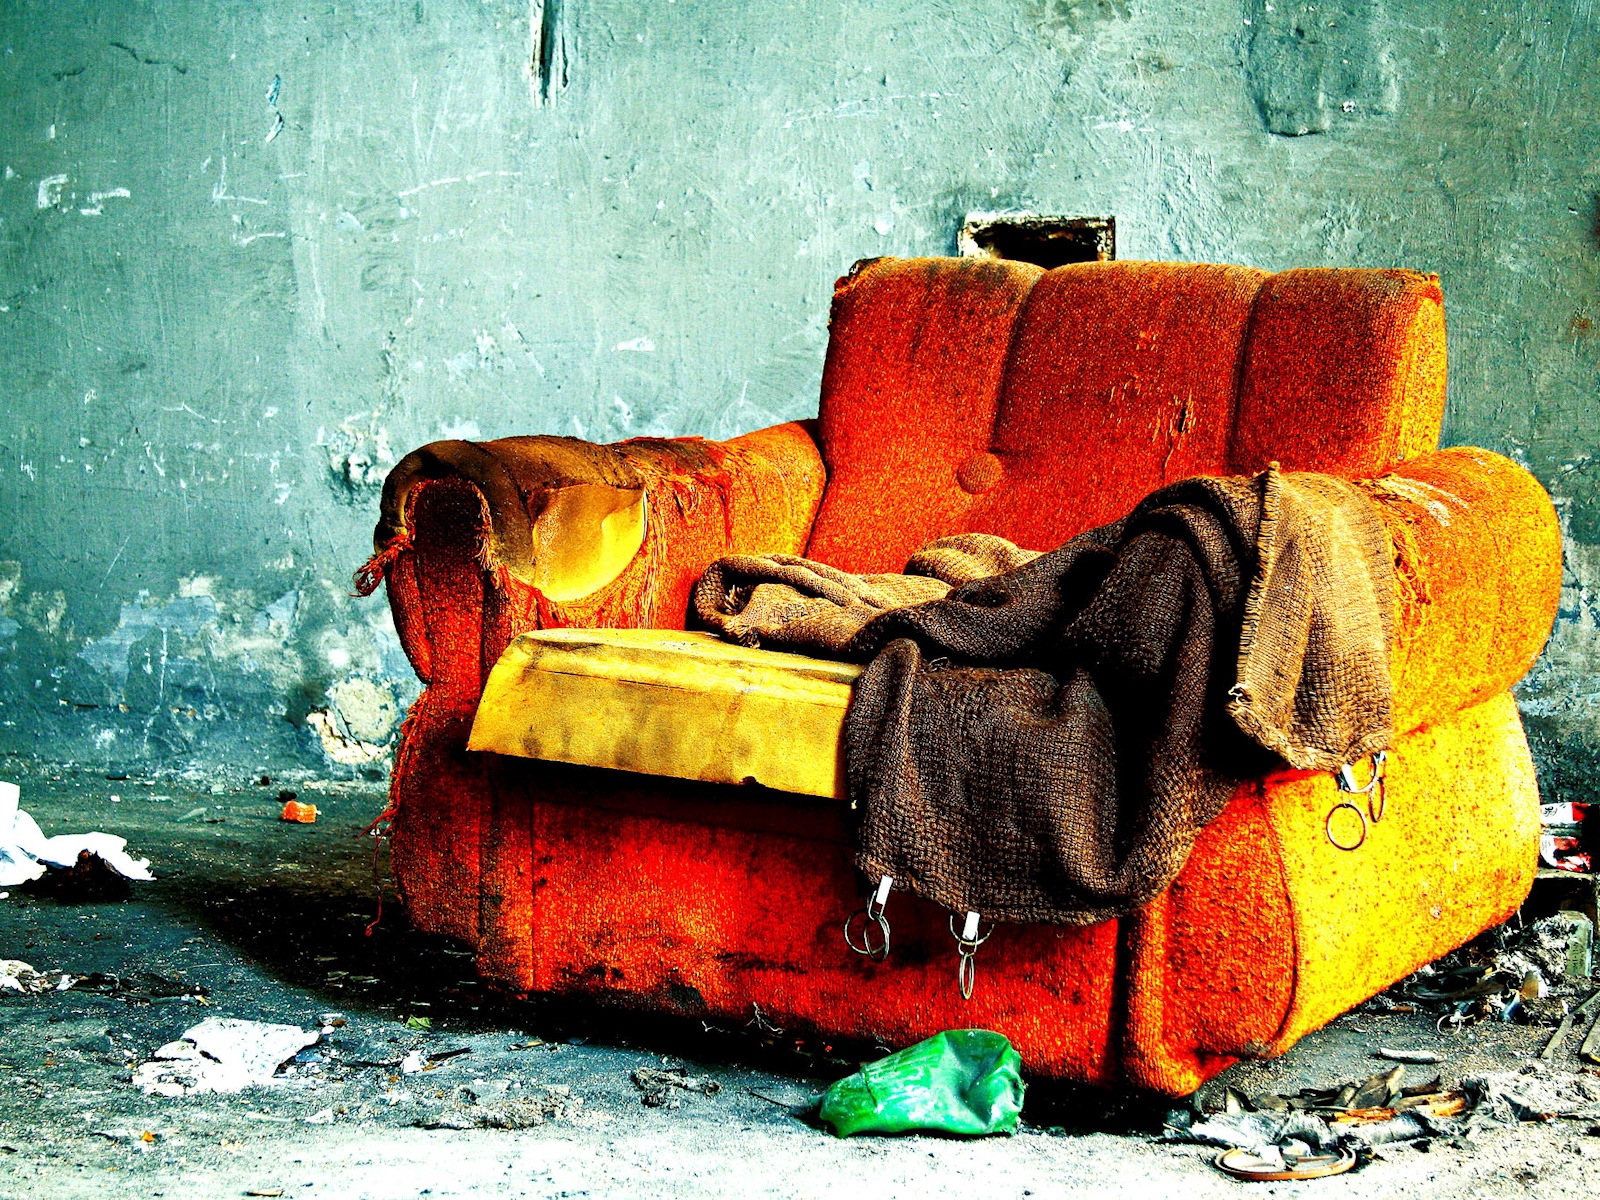 colourful, miscellanea, miscellaneous, old, colorful, armchair, ancient, ragged images